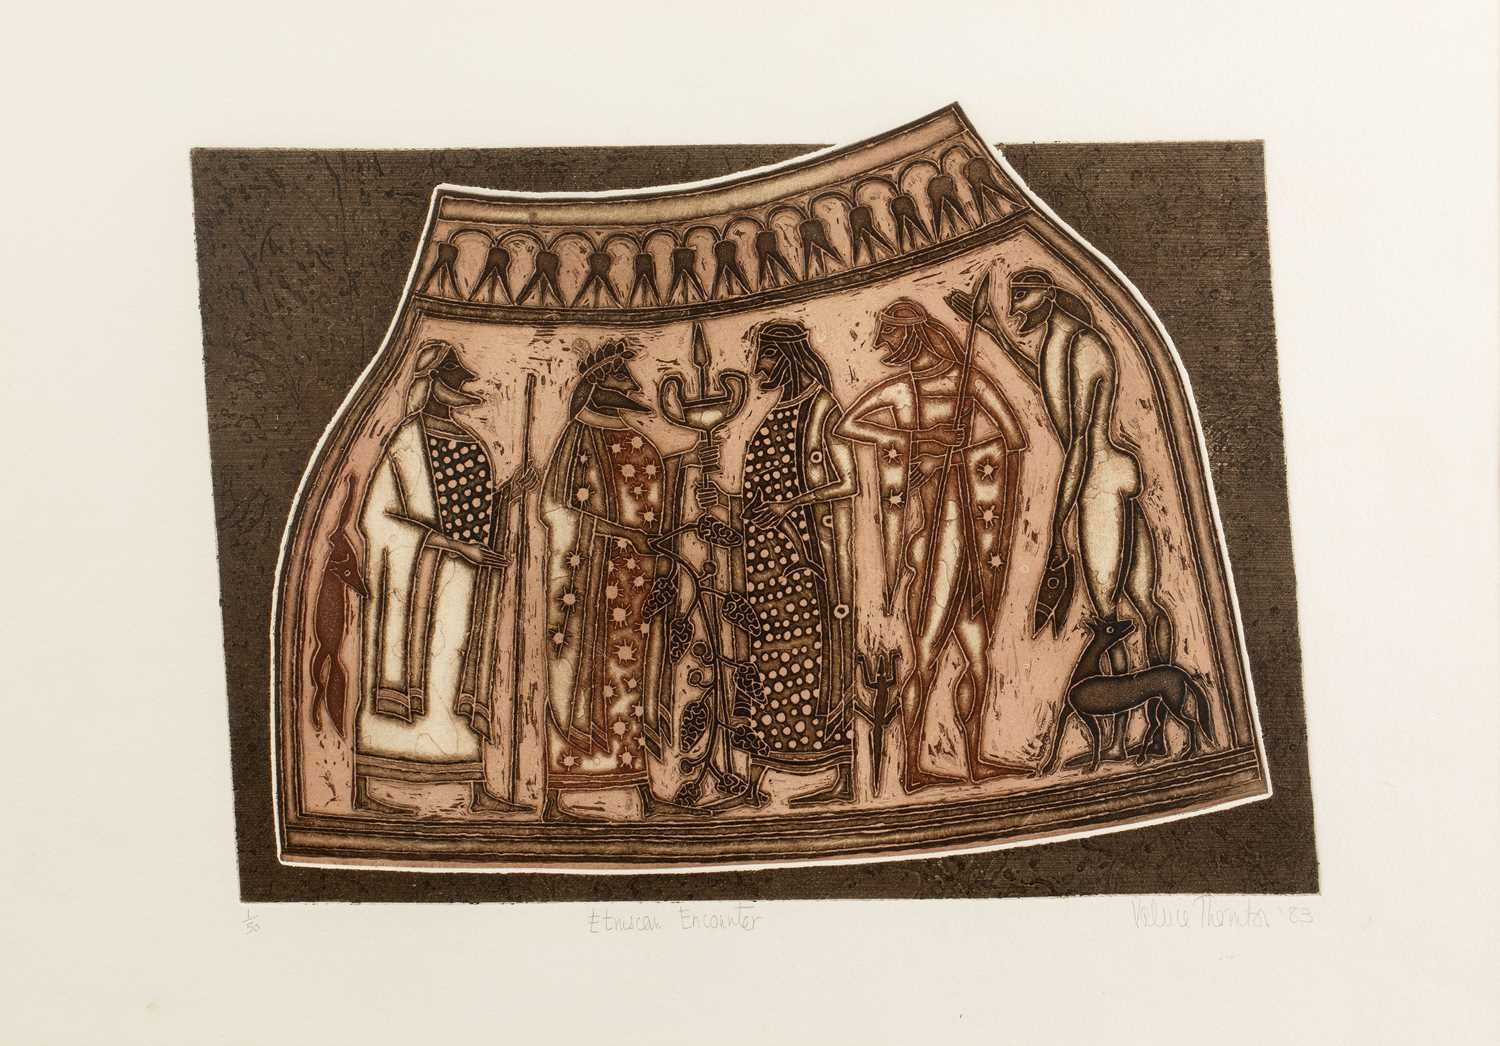 Valerie Thornton (1931-1991) 'Etruscan Encounter', etching with aquatint, pencil signed in the